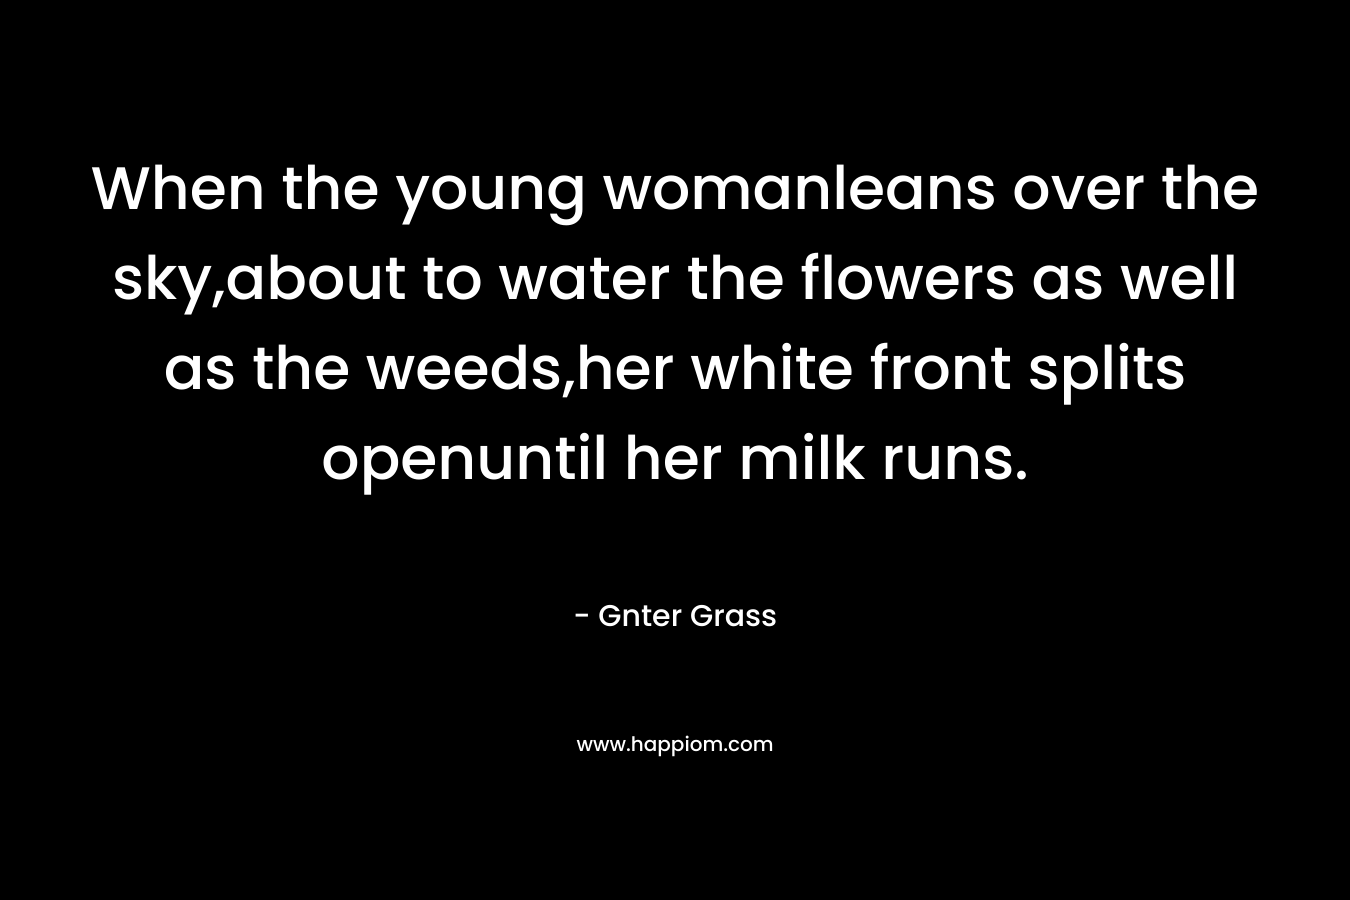 When the young womanleans over the sky,about to water the flowers as well as the weeds,her white front splits openuntil her milk runs. – Gnter Grass